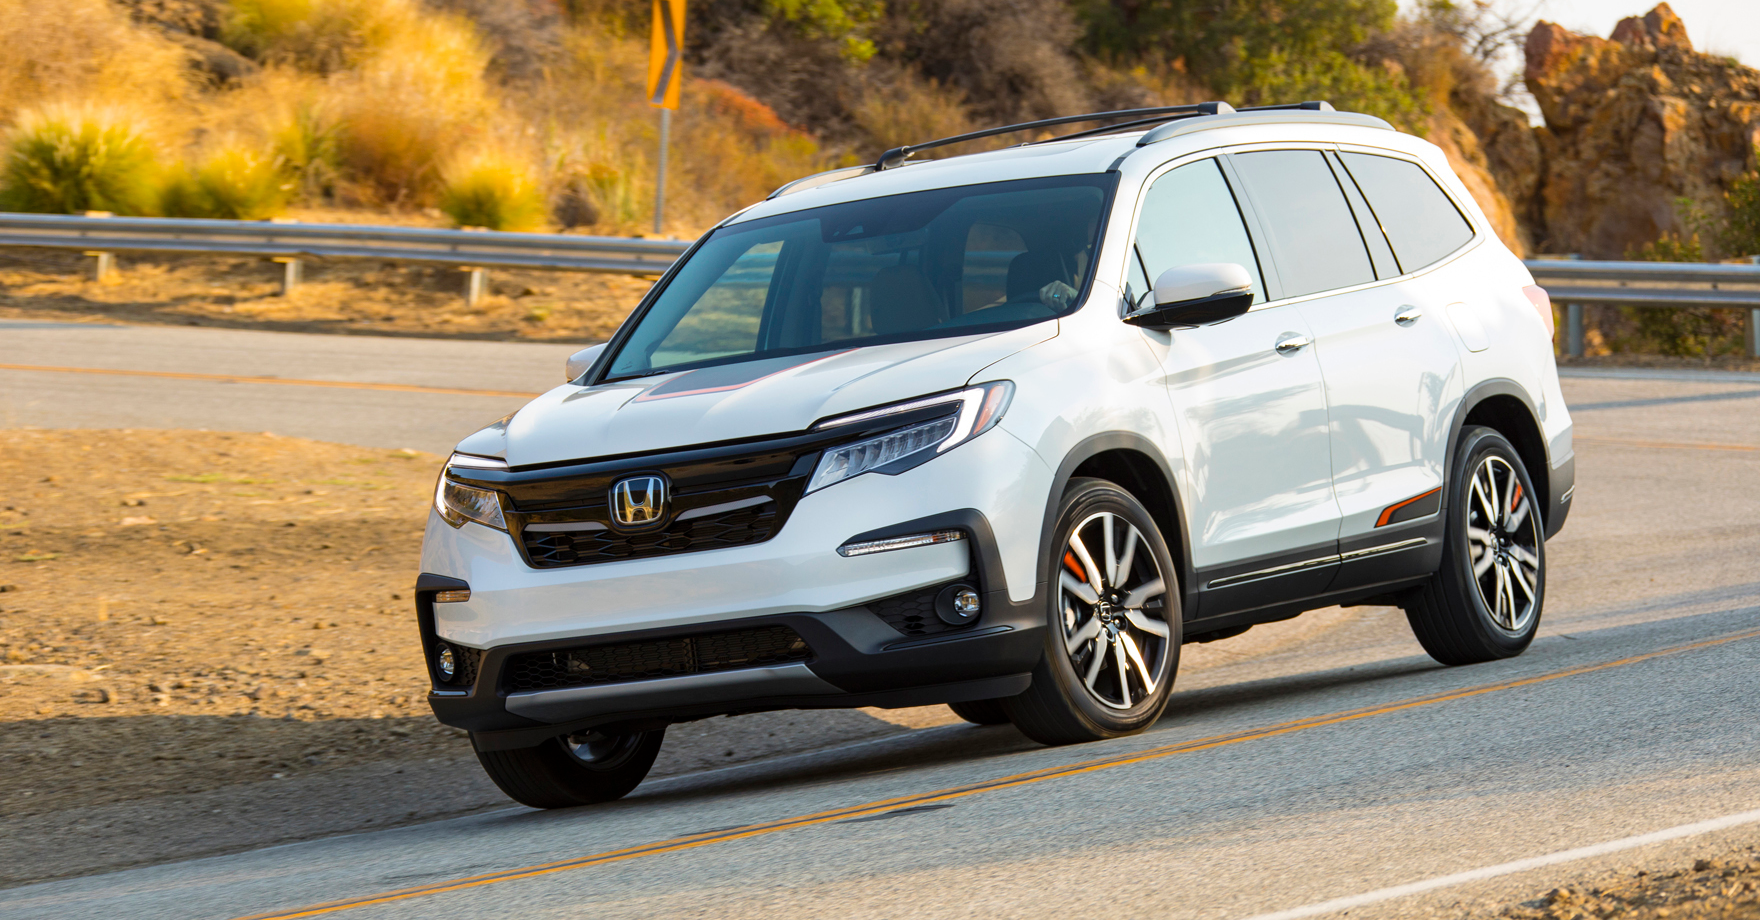 2020 Honda Pilot: This SUV Takes You There